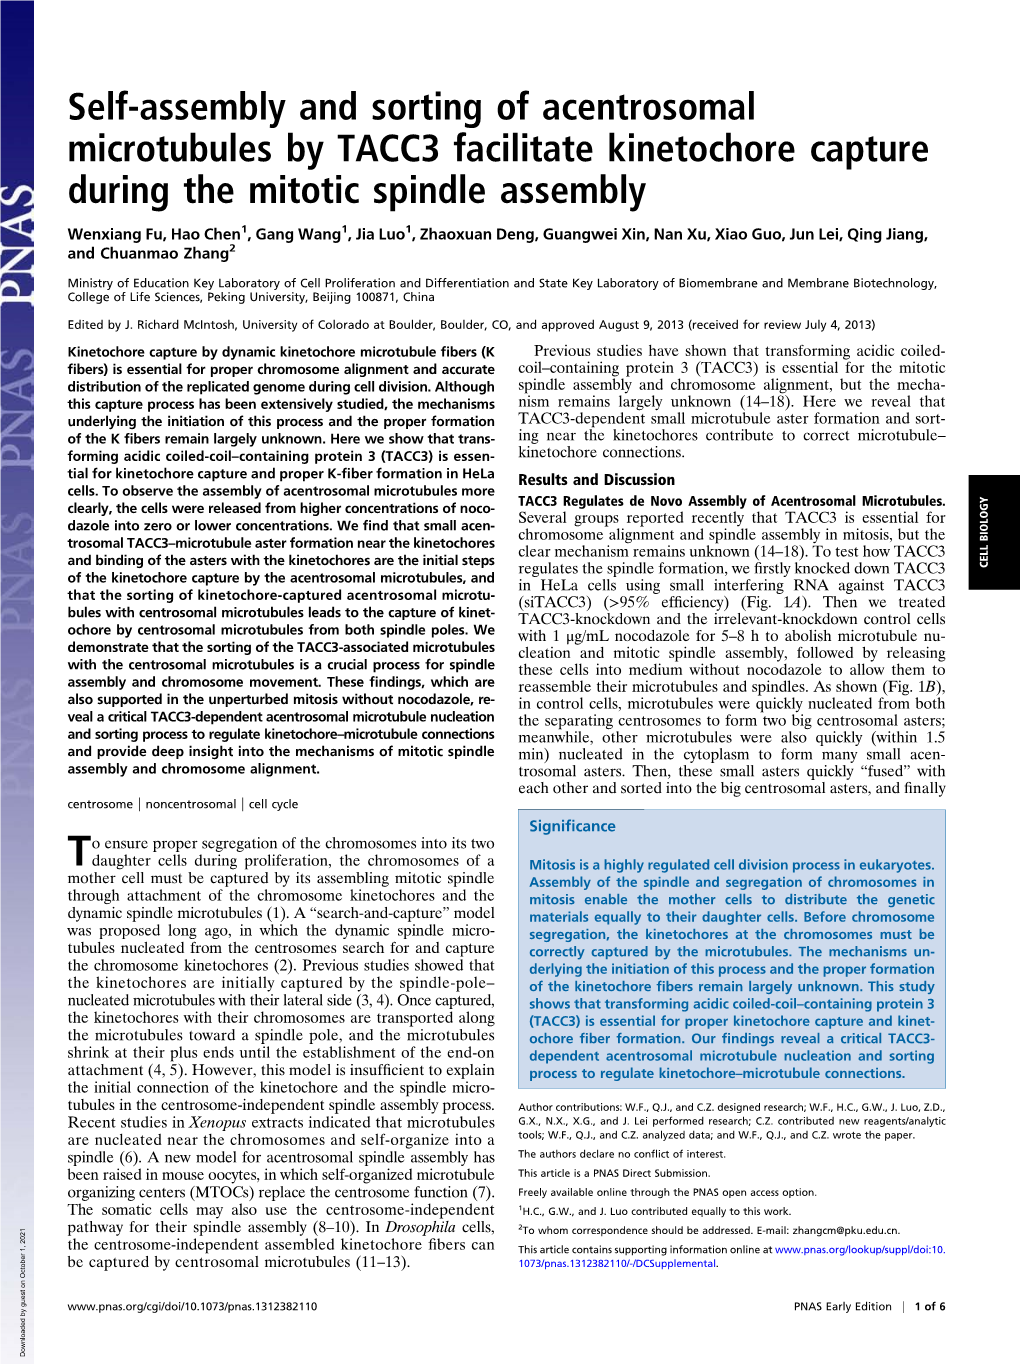 Self-Assembly and Sorting of Acentrosomal Microtubules by TACC3 Facilitate Kinetochore Capture During the Mitotic Spindle Assembly